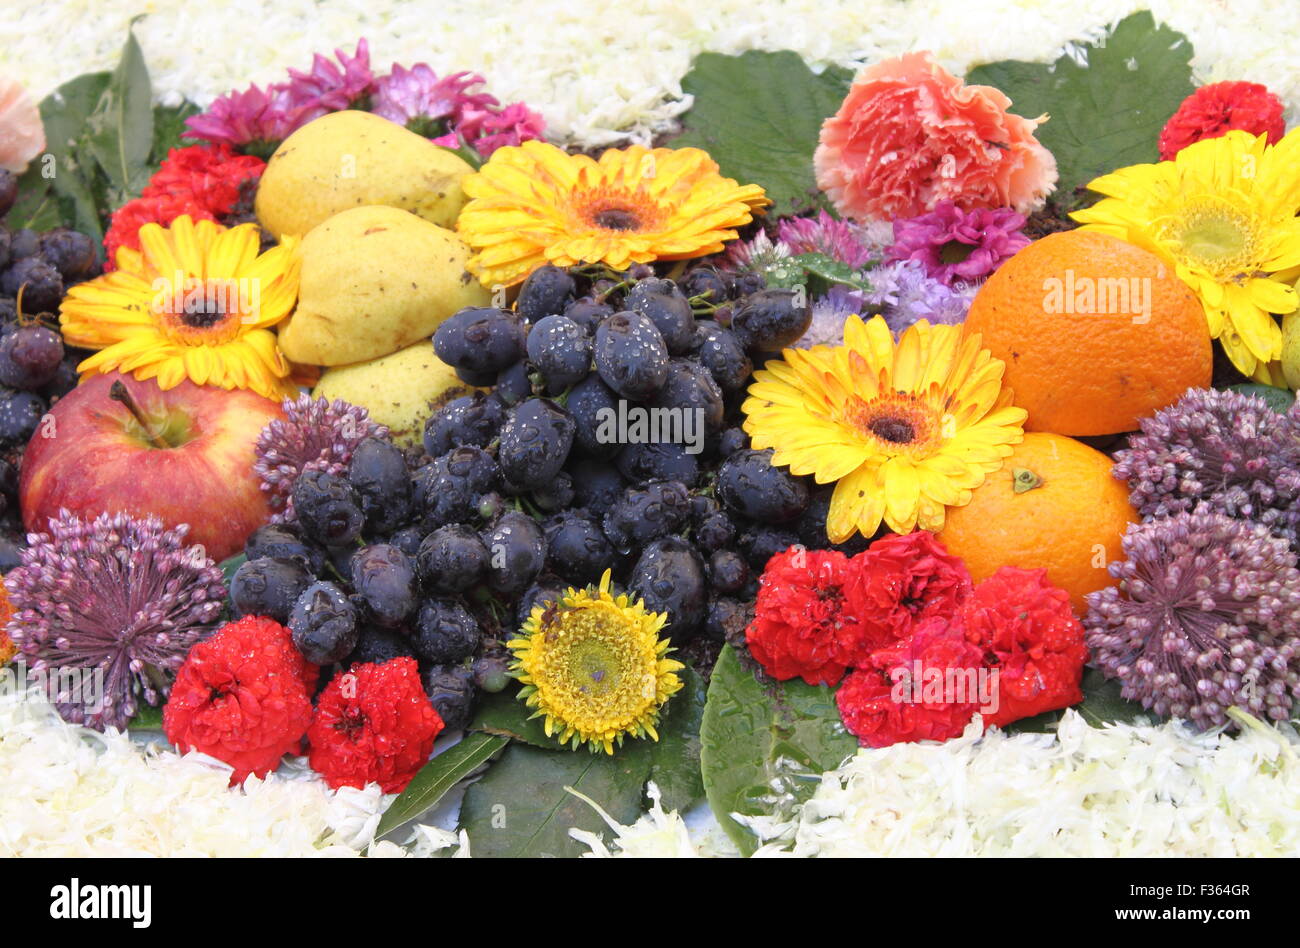 Art composition with fresh fruits and flowers Stock Photo